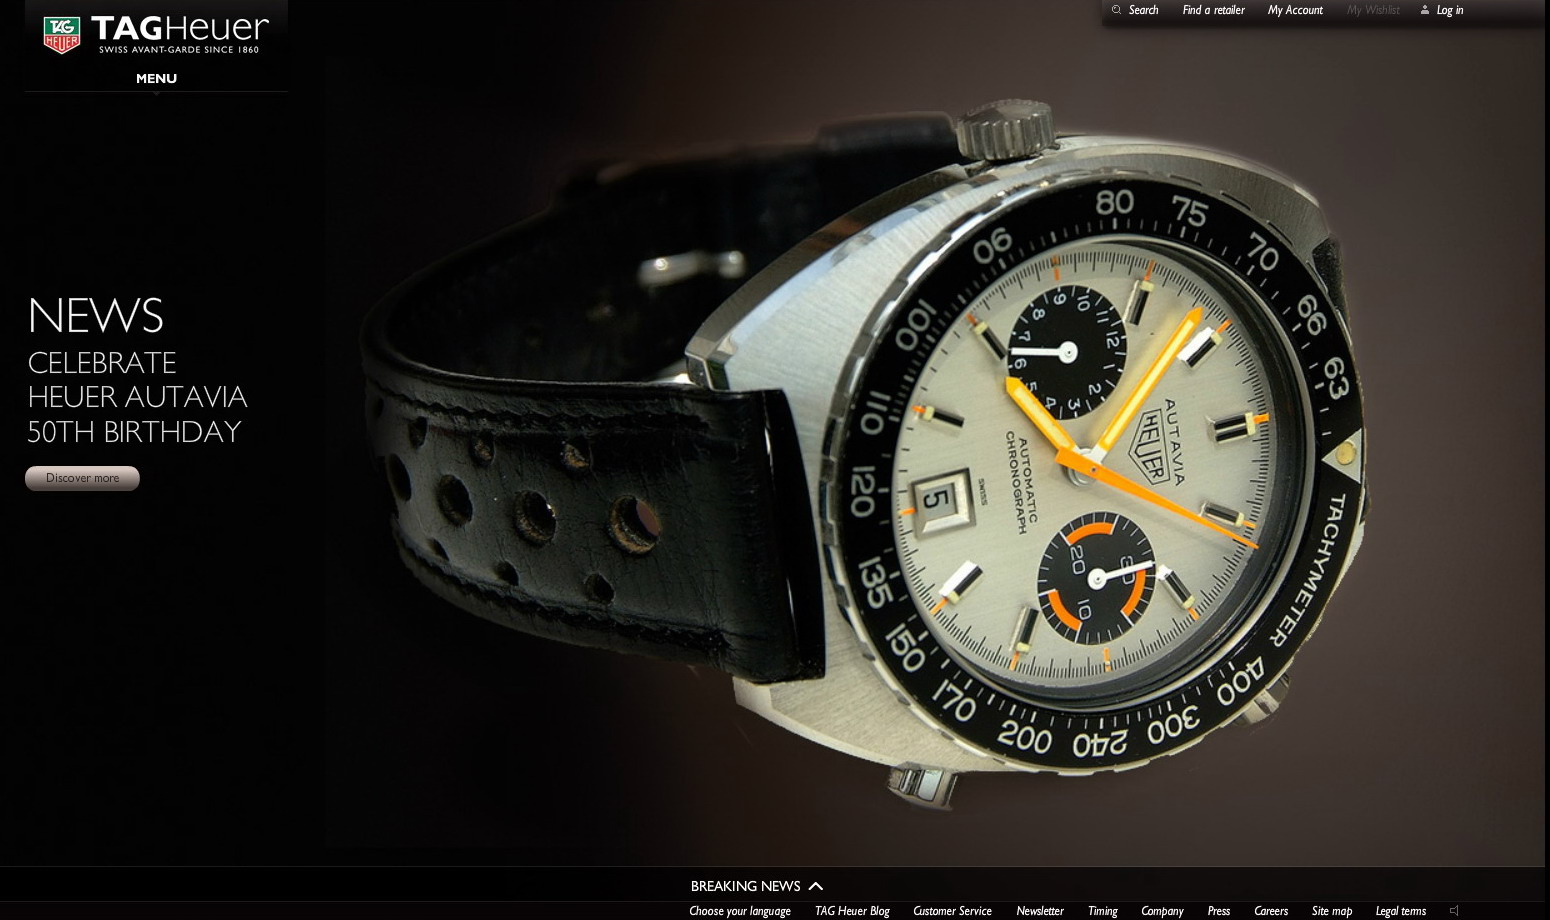 Click to see full 1550 x 920 image of TAGHeuer12Dec10